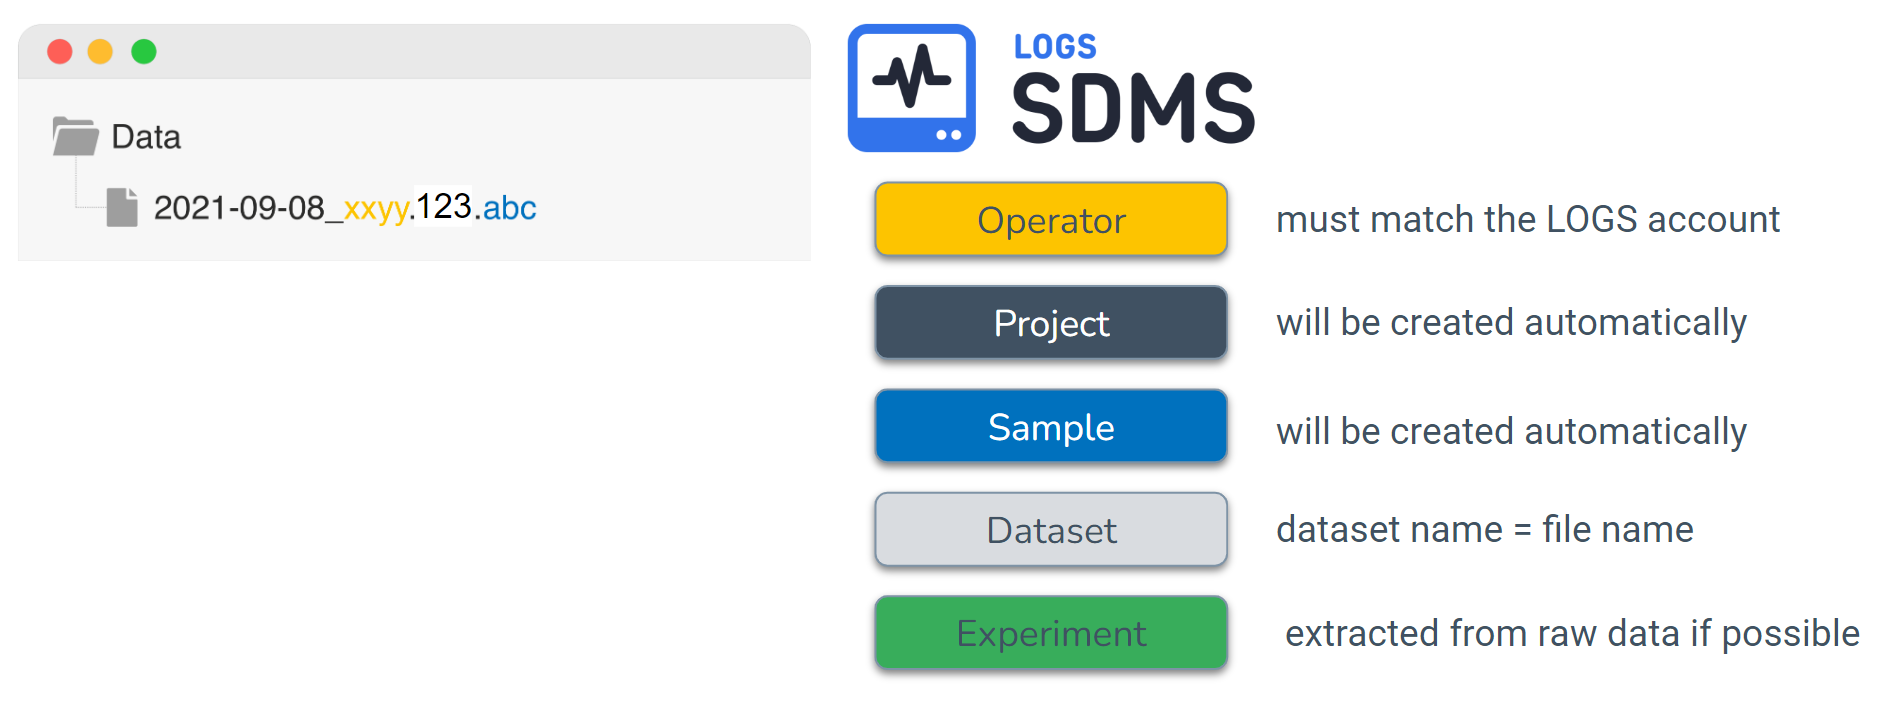 Experiment title information used to map LOGS-SDMS metadata